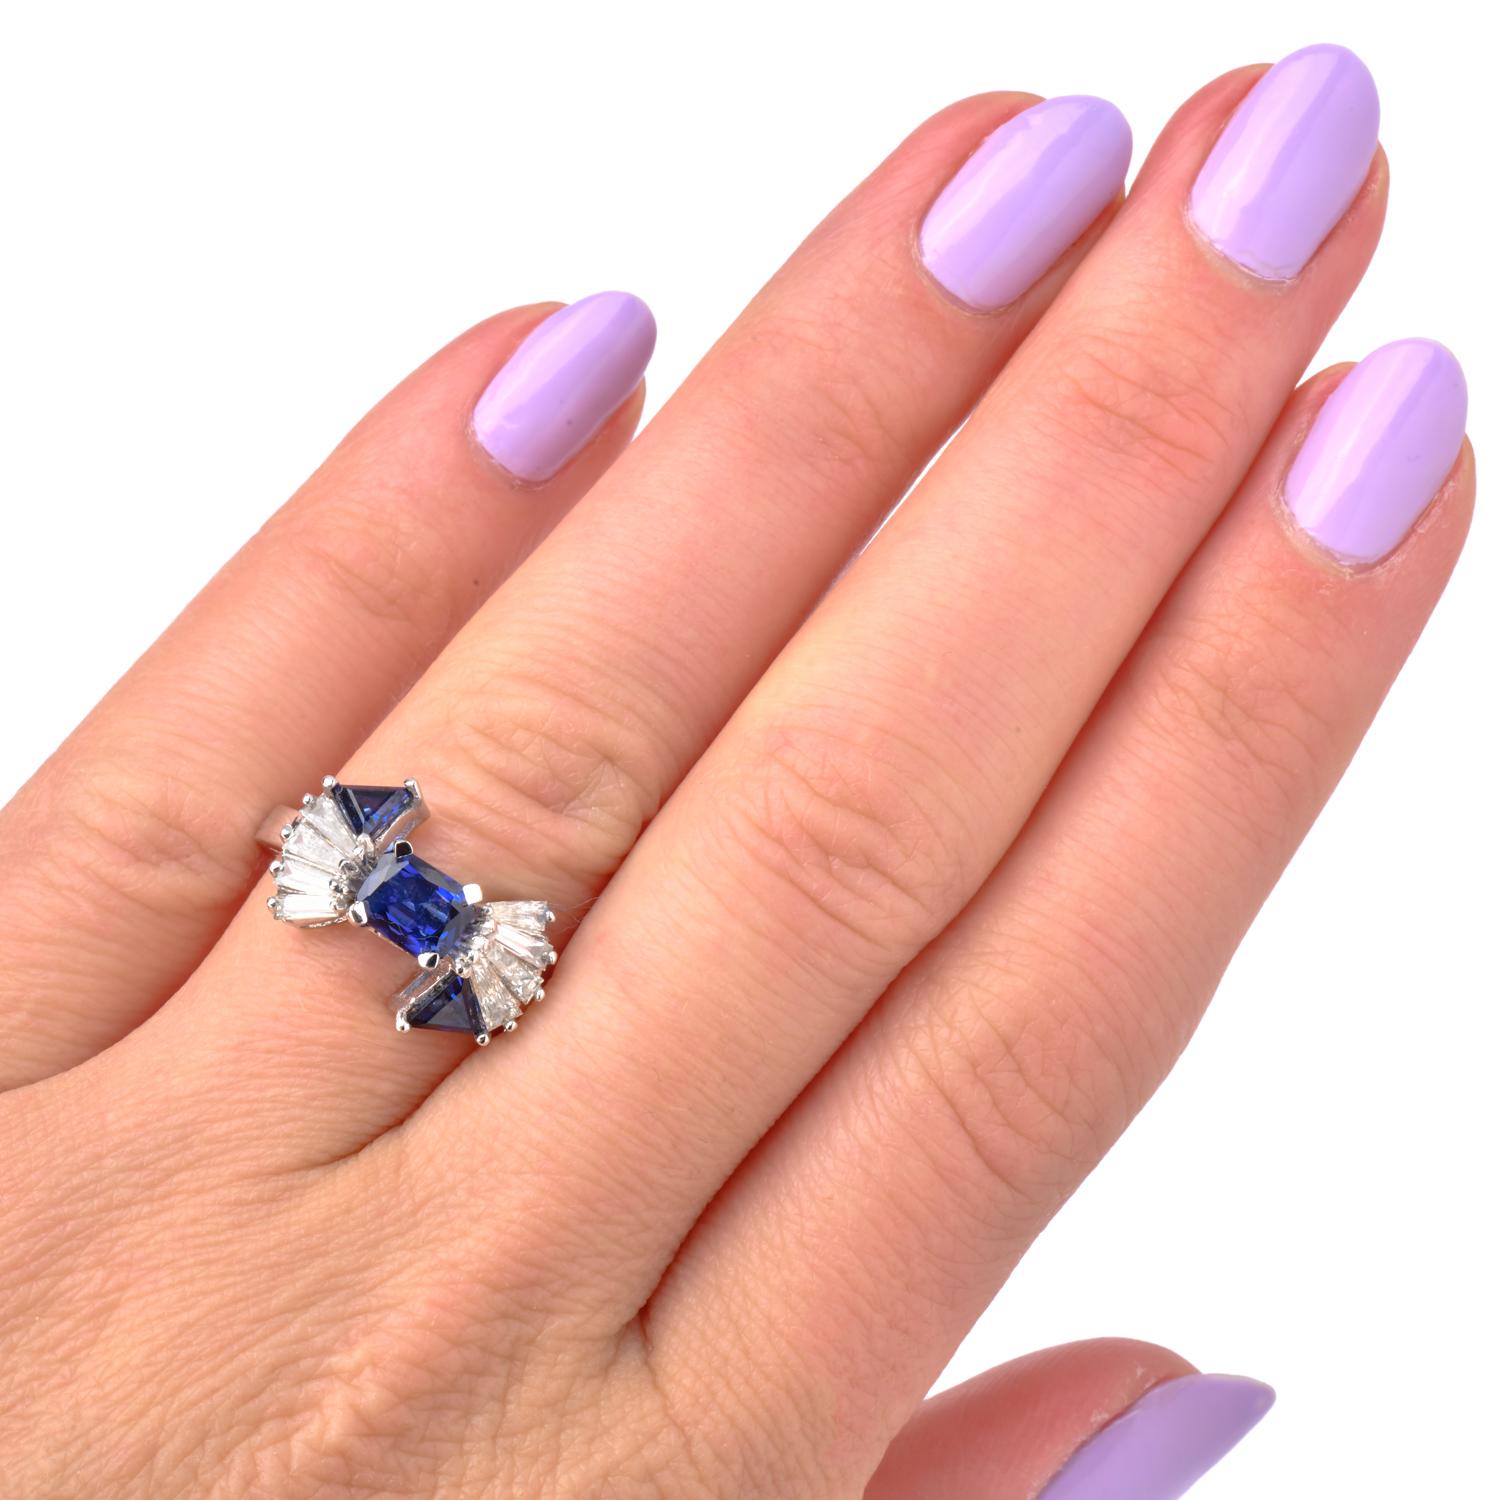  Captivating Twilight Blue Sapphire gracefully rests alongside tapered baguette diamonds forming a beautiful Bow design. Meticulously crafted in 18 Karat White Gold.

Gracefully sculpted bow with intent twilight hue Blue Sapphire in Triangle cuts on